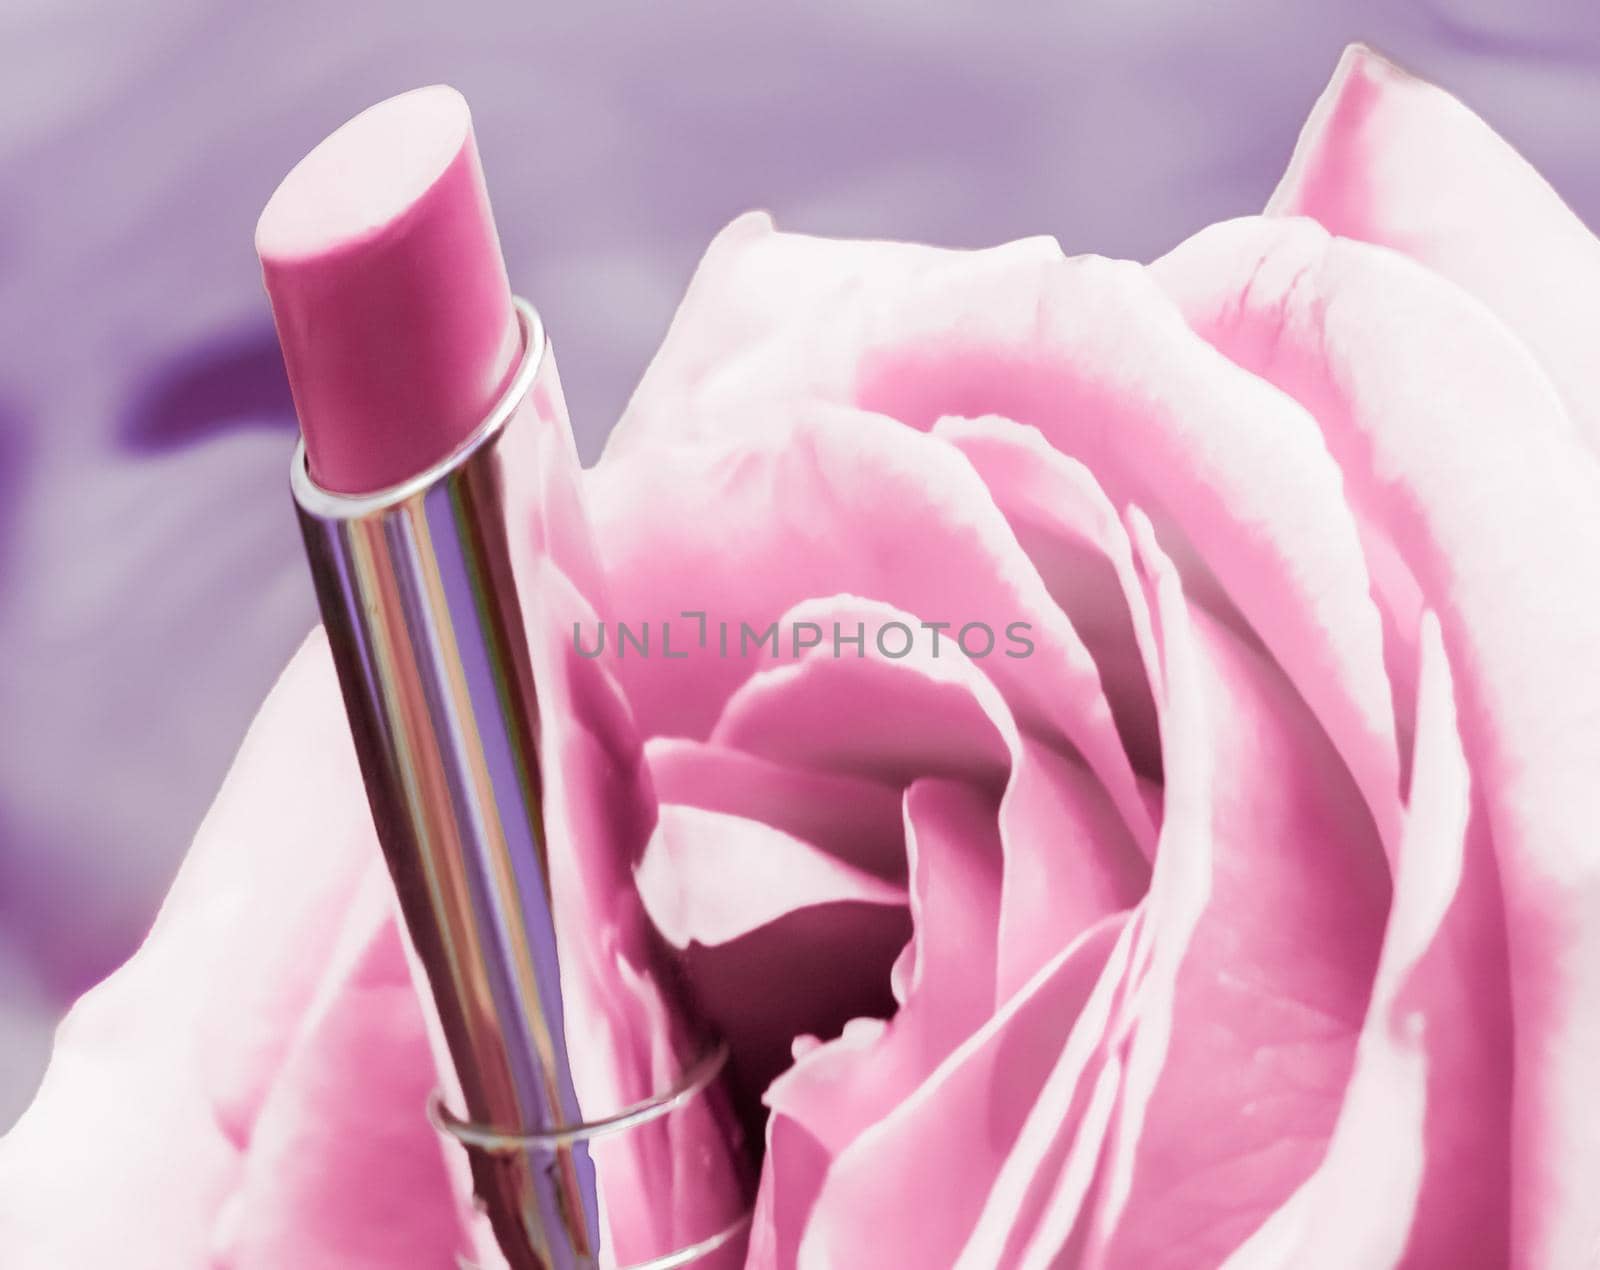 Cosmetic branding, luxe and fashion concept - Pink lipstick and rose flower on liquid background, waterproof glamour make-up and lip gloss cosmetics product for luxury beauty brand holiday design